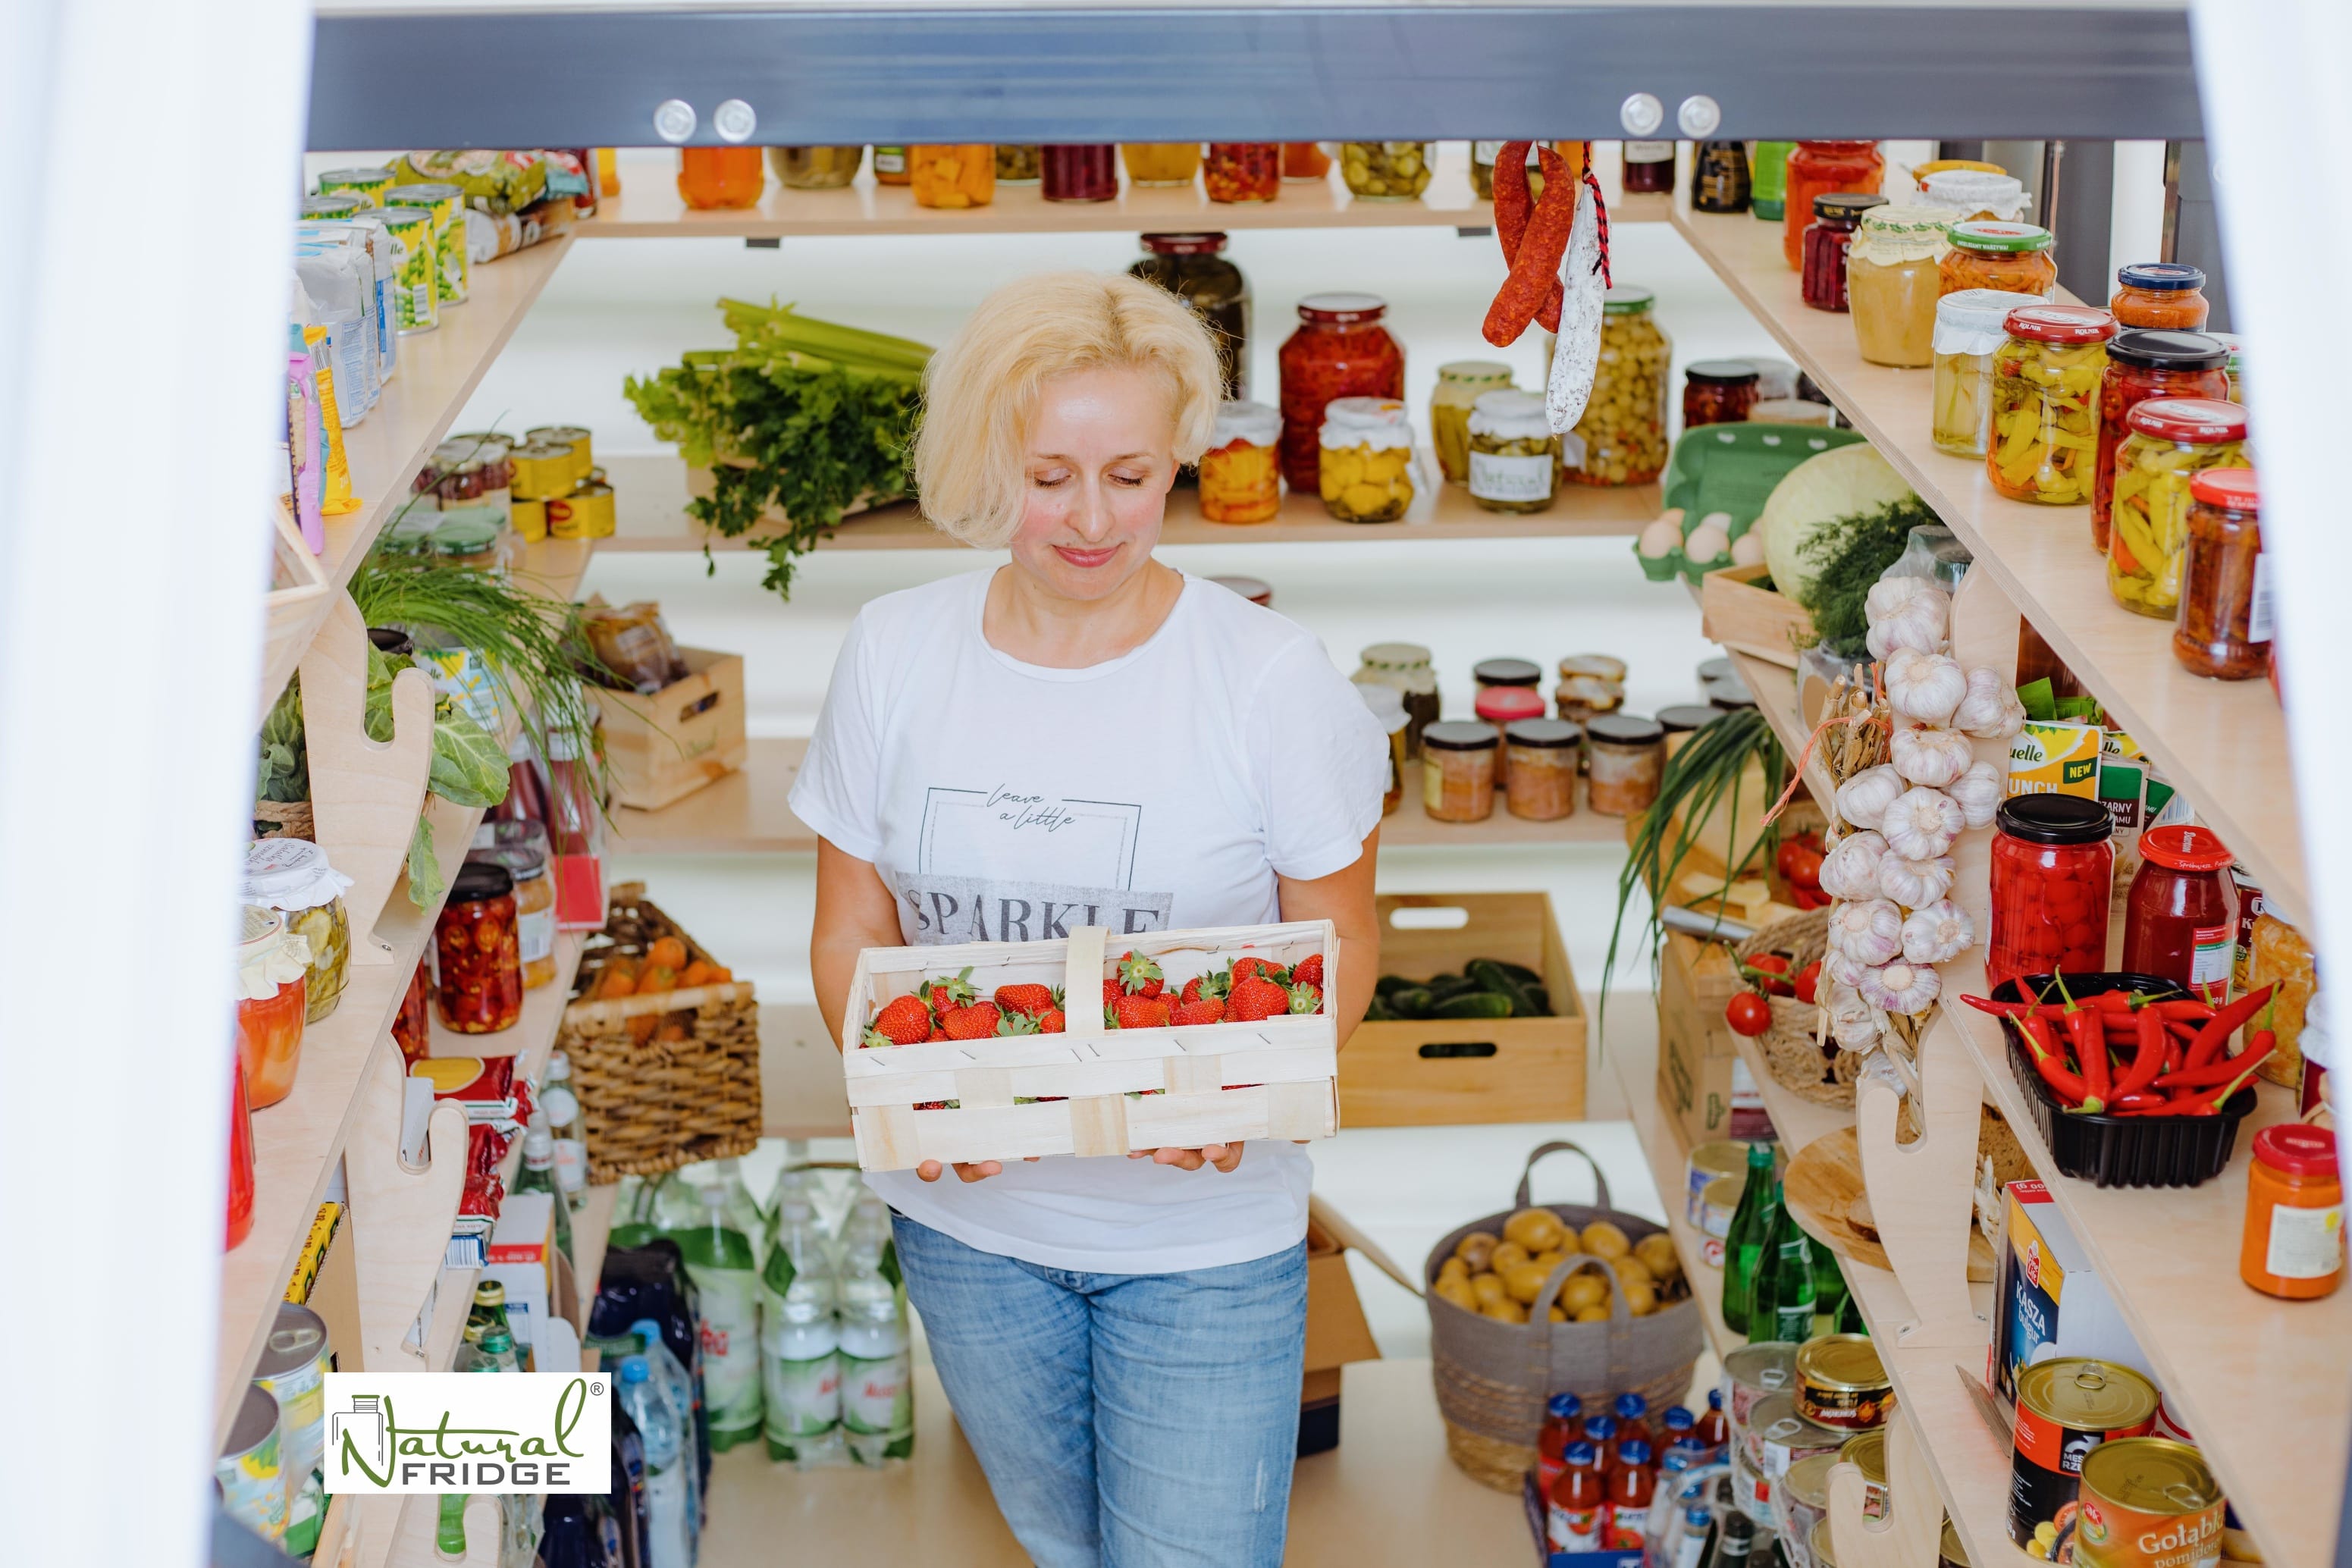 The cellar provides a lot of space inside. The floor area is up to 7 m2. This allows you to store many vegetables in bags directly on the floor. Putting preserves on the shelves is very convenient. Cellar 200x350 Natural Fridge Gross price 9,296 EUR